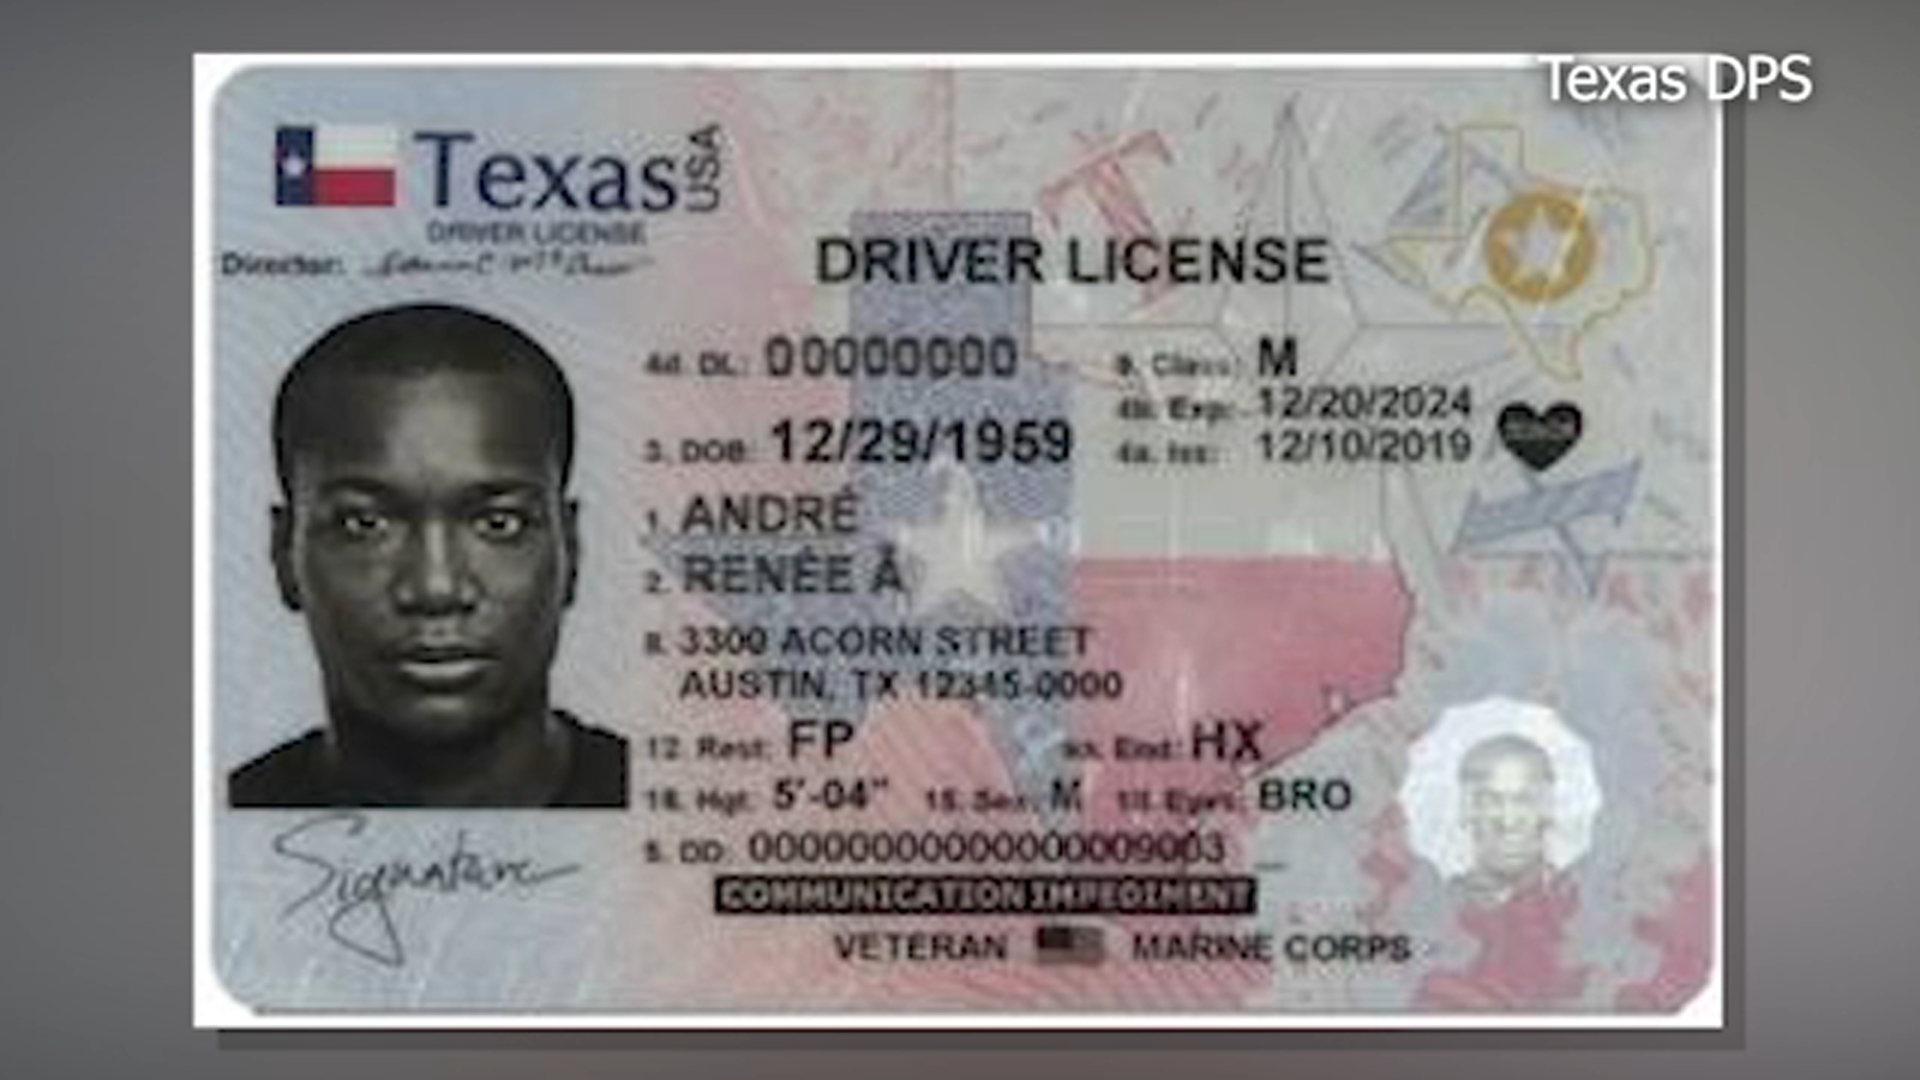 texas drivers license id number number sample